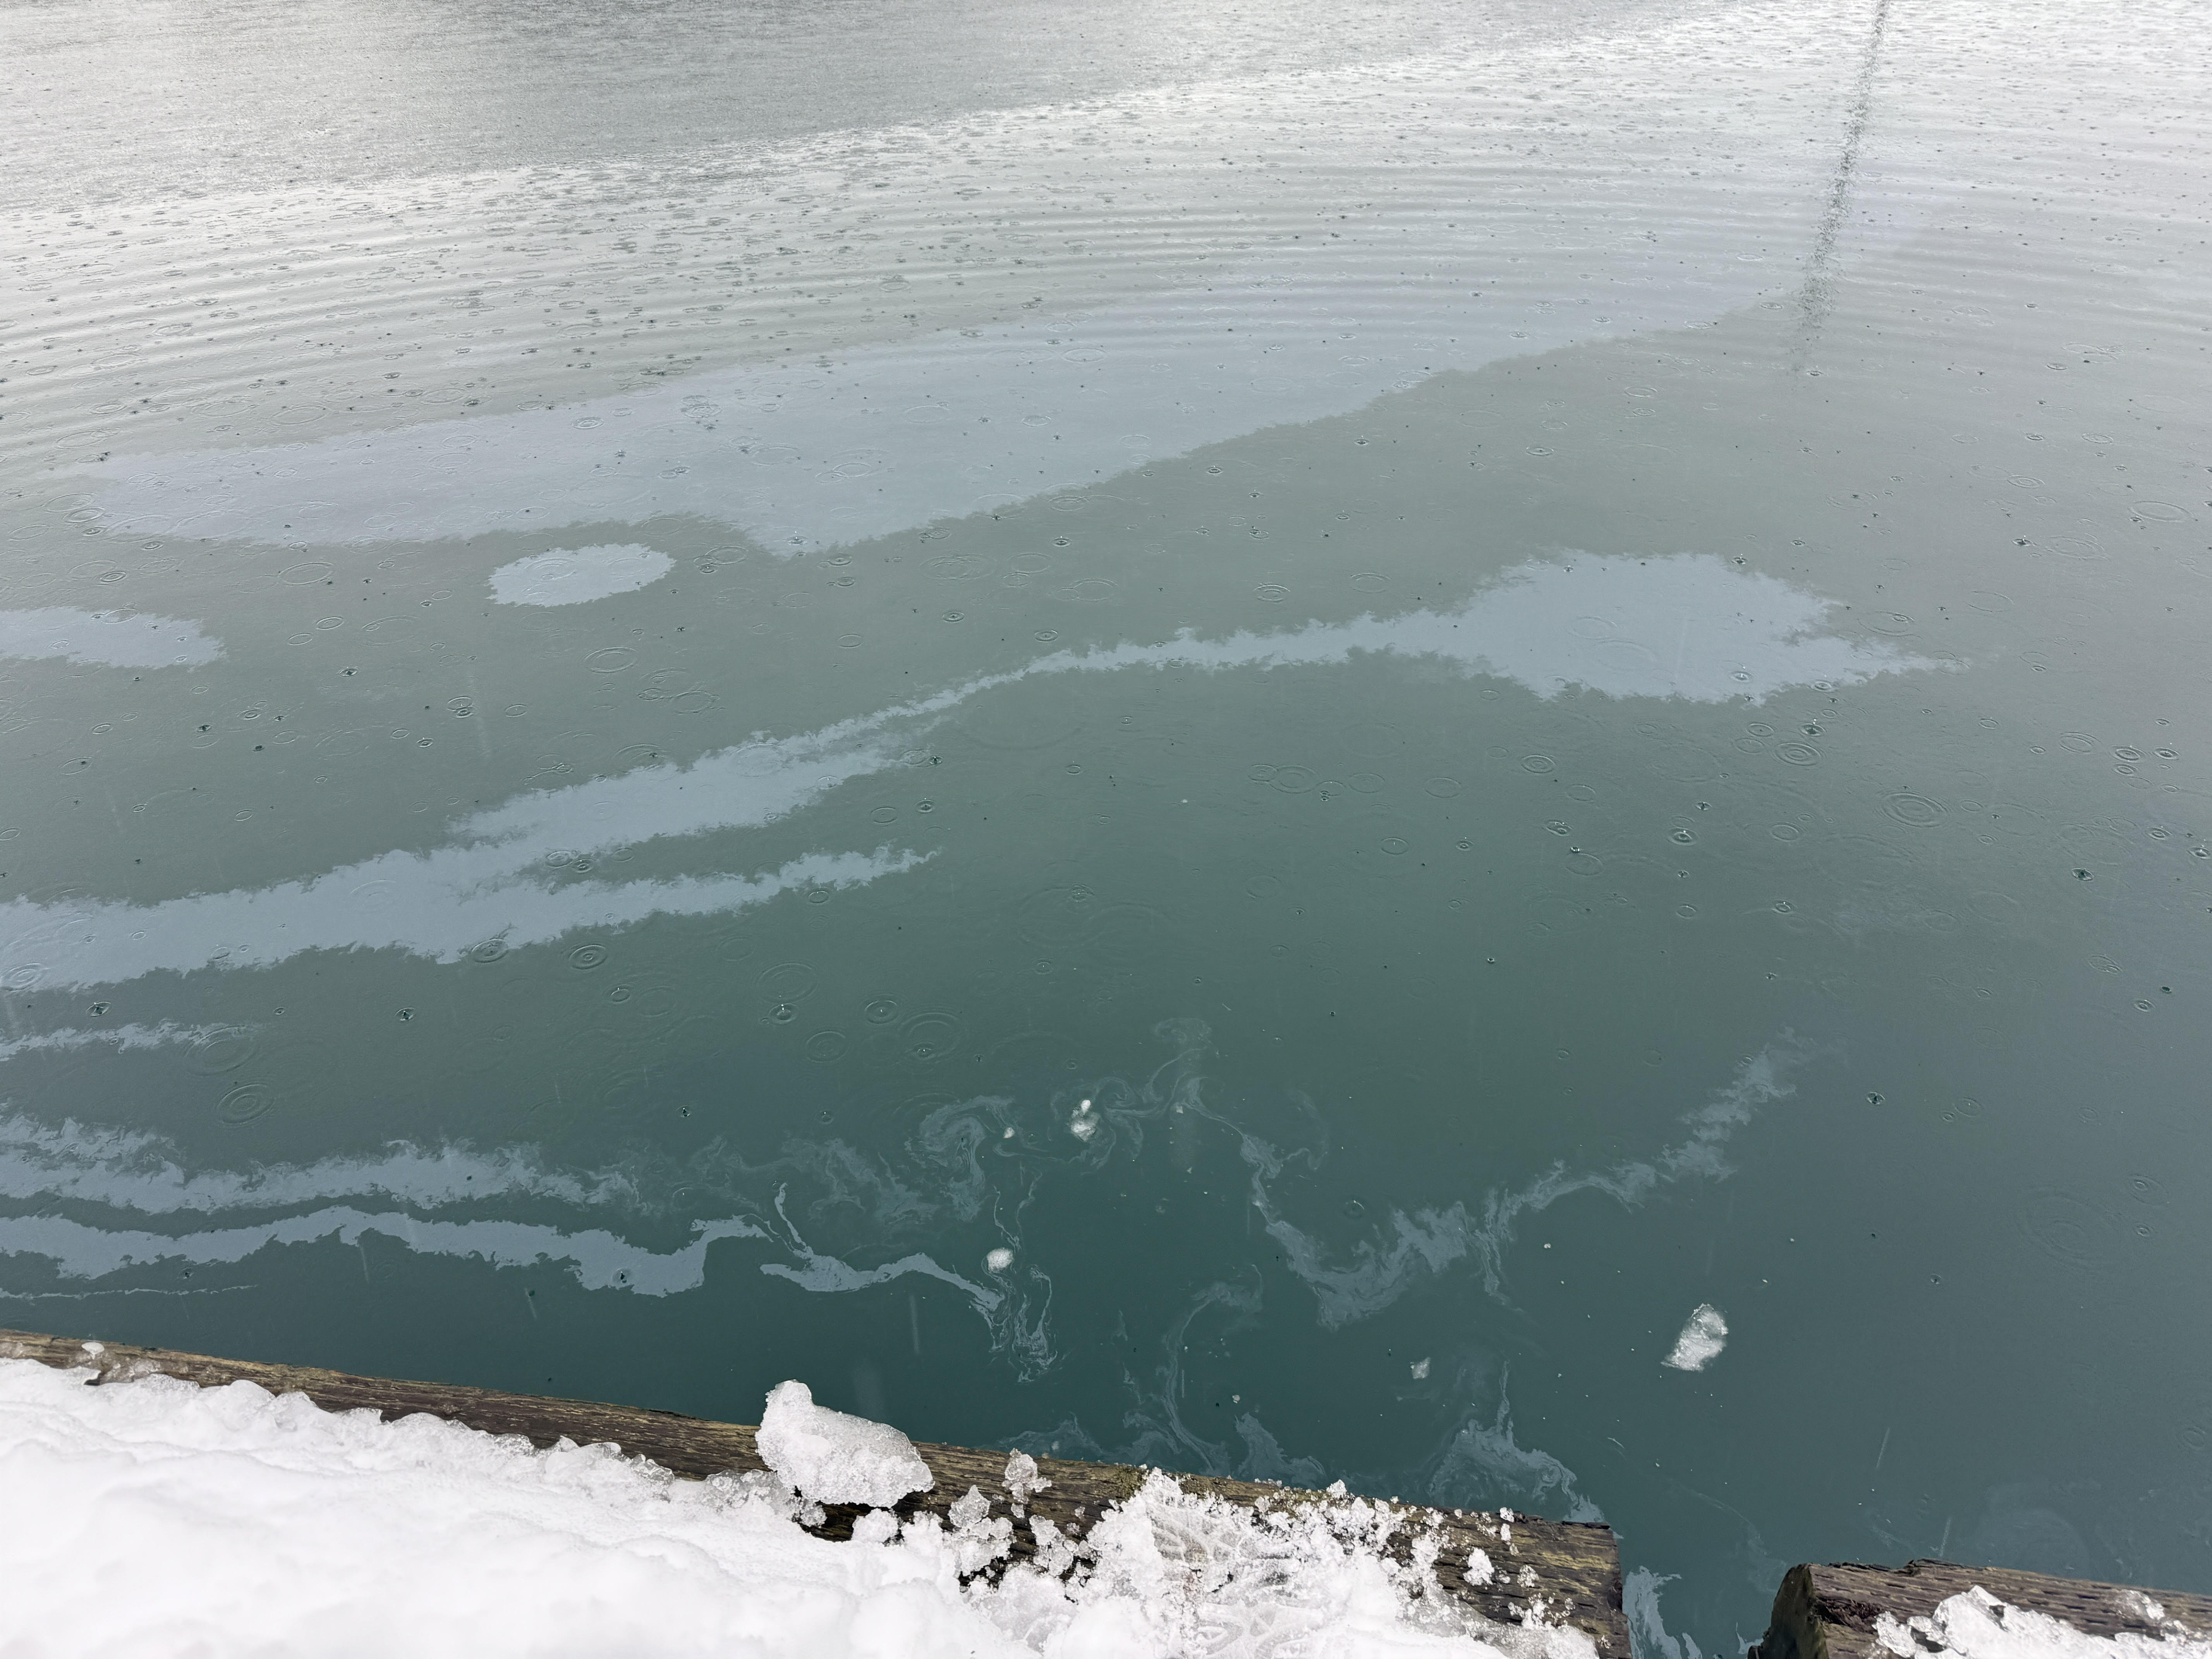 Significant sheen and odor resulted in Statter Harbor in Auke Bay from a trolling vessel that was slowly raised to the surface with the use of large inflation bags. The vessel had an absorbent boom and floating absorbent pads associated with it, but much of the fuel (diesel) was escaping and drifted for hundreds of yards.